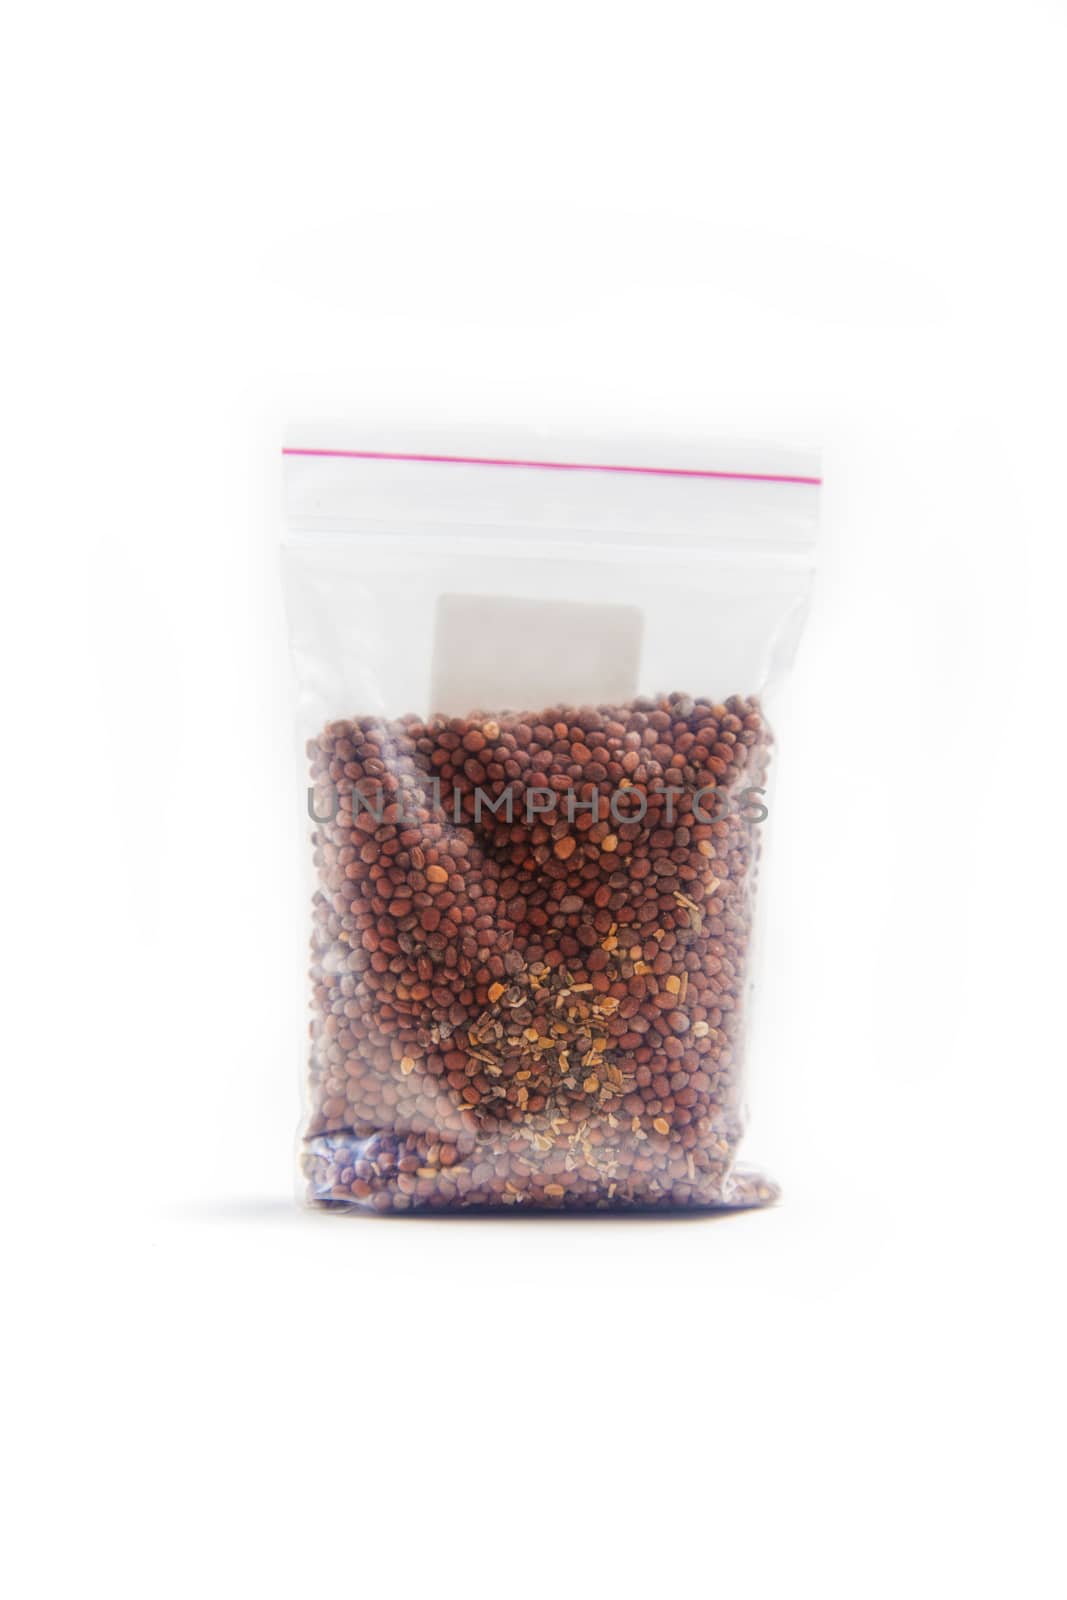 Chinese radish seeds in a package for germination on a white background by galinasharapova